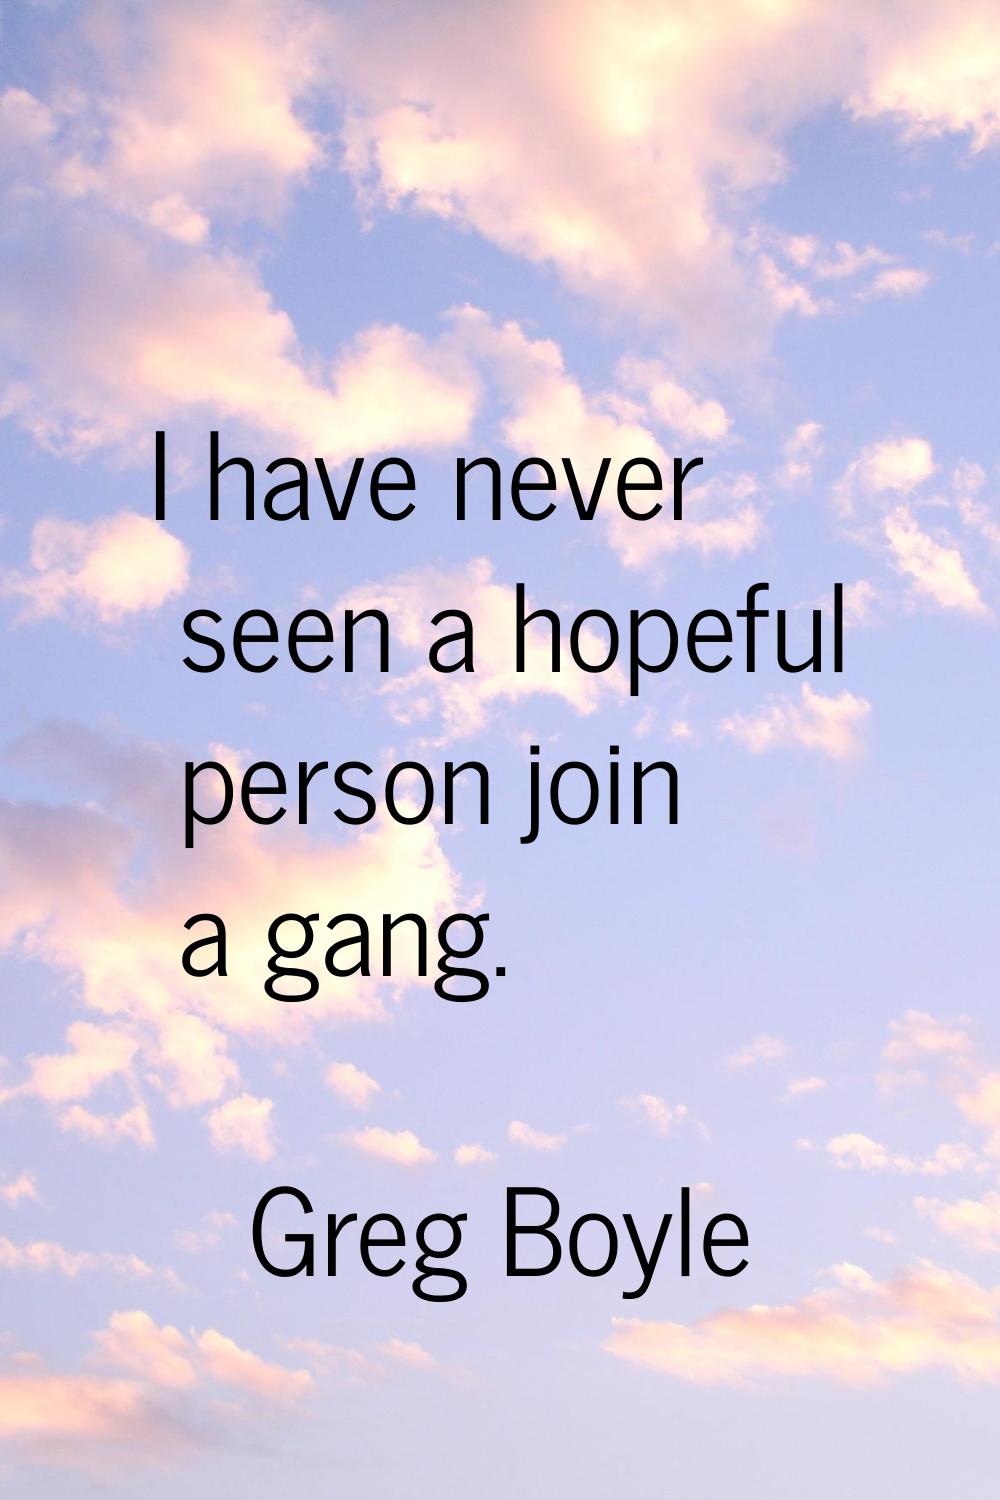 I have never seen a hopeful person join a gang.